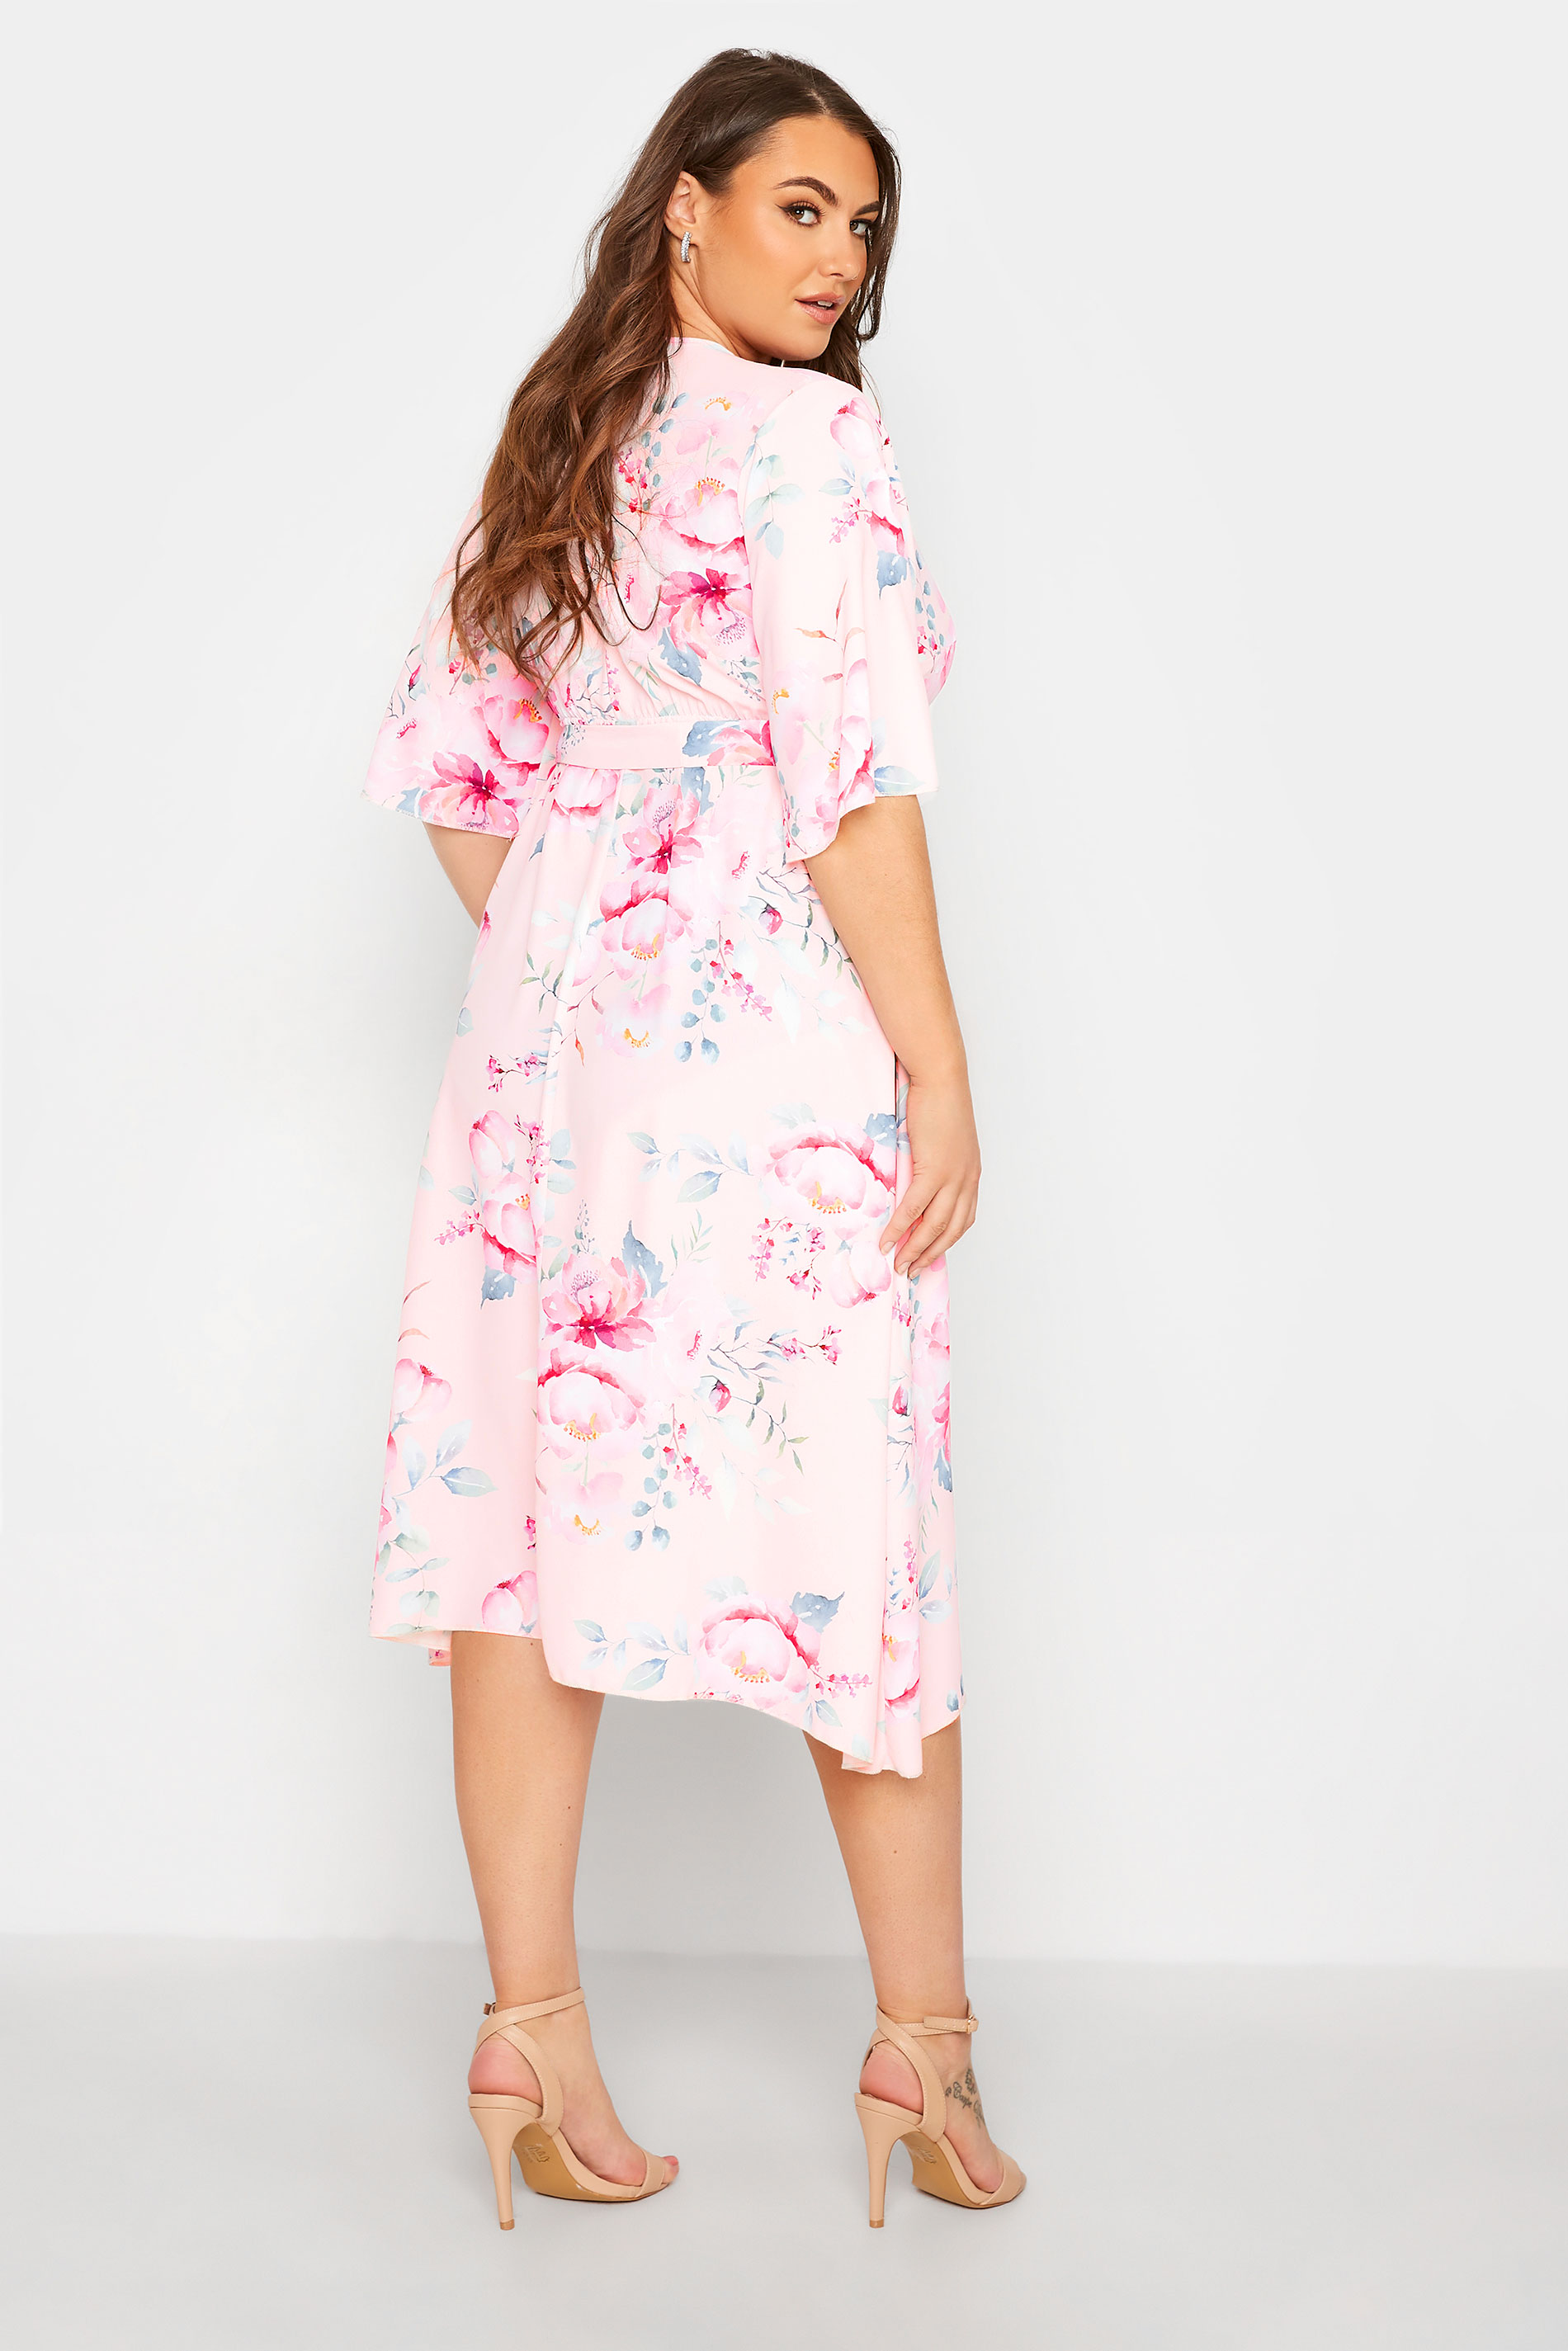 Robes Grande Taille Grande taille  Robes Portefeuilles | YOURS LONDON - Robe Rose Poudré Floral Style Portefeuille - FX64690